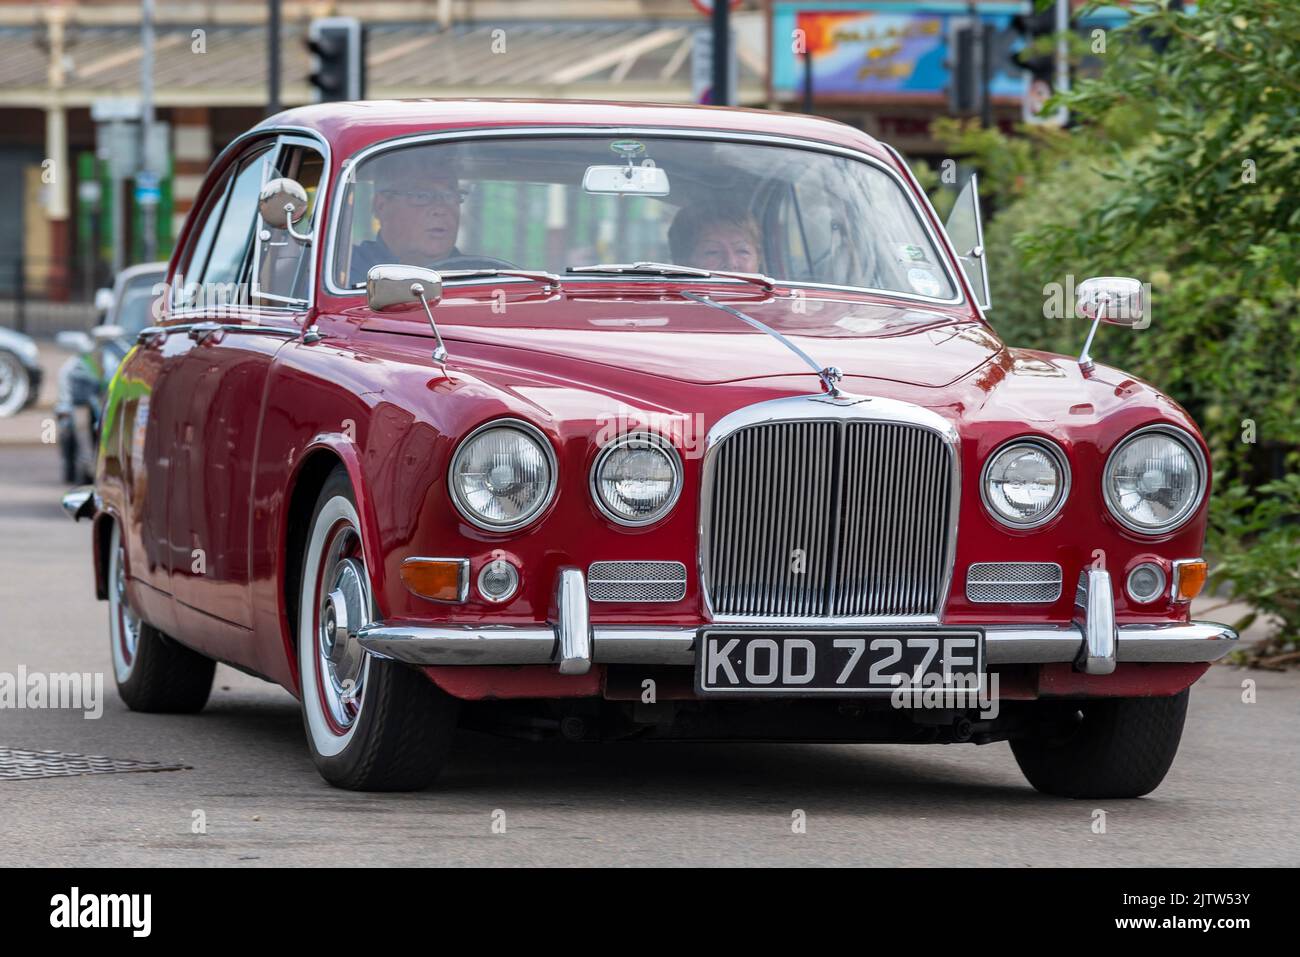 1967 Jaguar 420 arriving at Classic Cars on the Beach car show on Marine Parade, Southend on Sea, Essex, UK. Maroon luxury saloon automobile Stock Photo